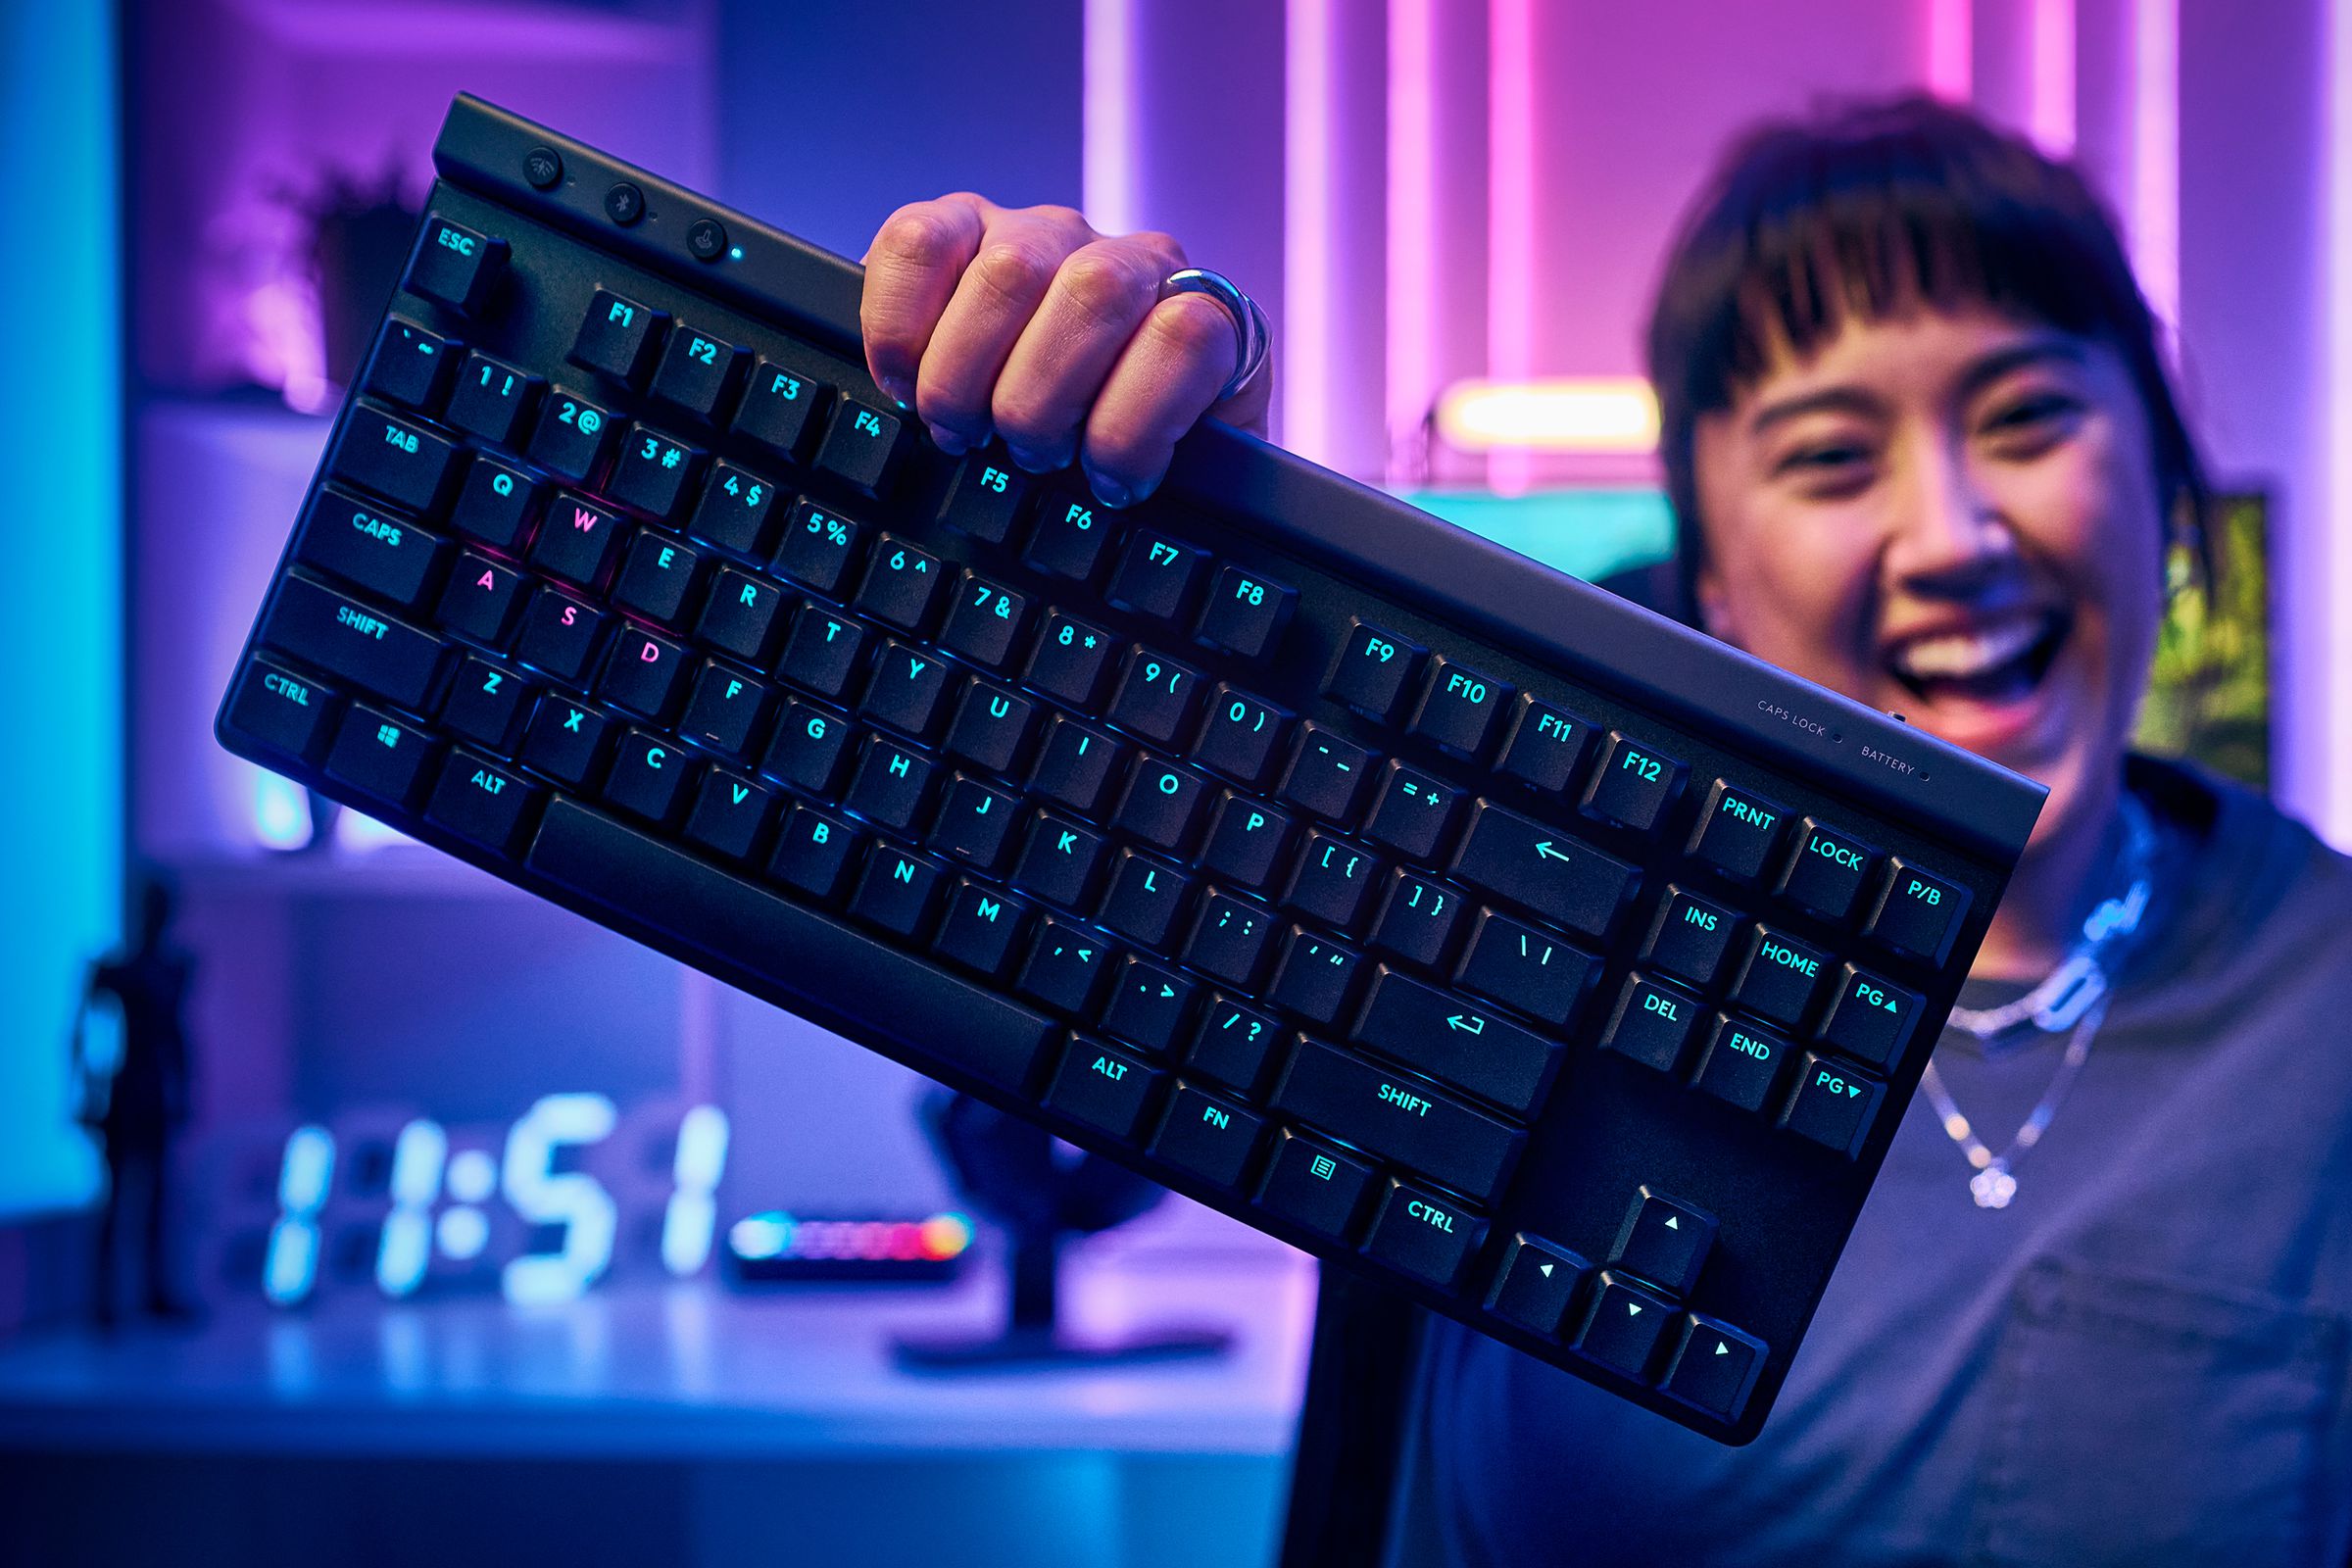 A user holds the Logitech G515 keyboard in one hand in front a computer setup featuring neon lighting.